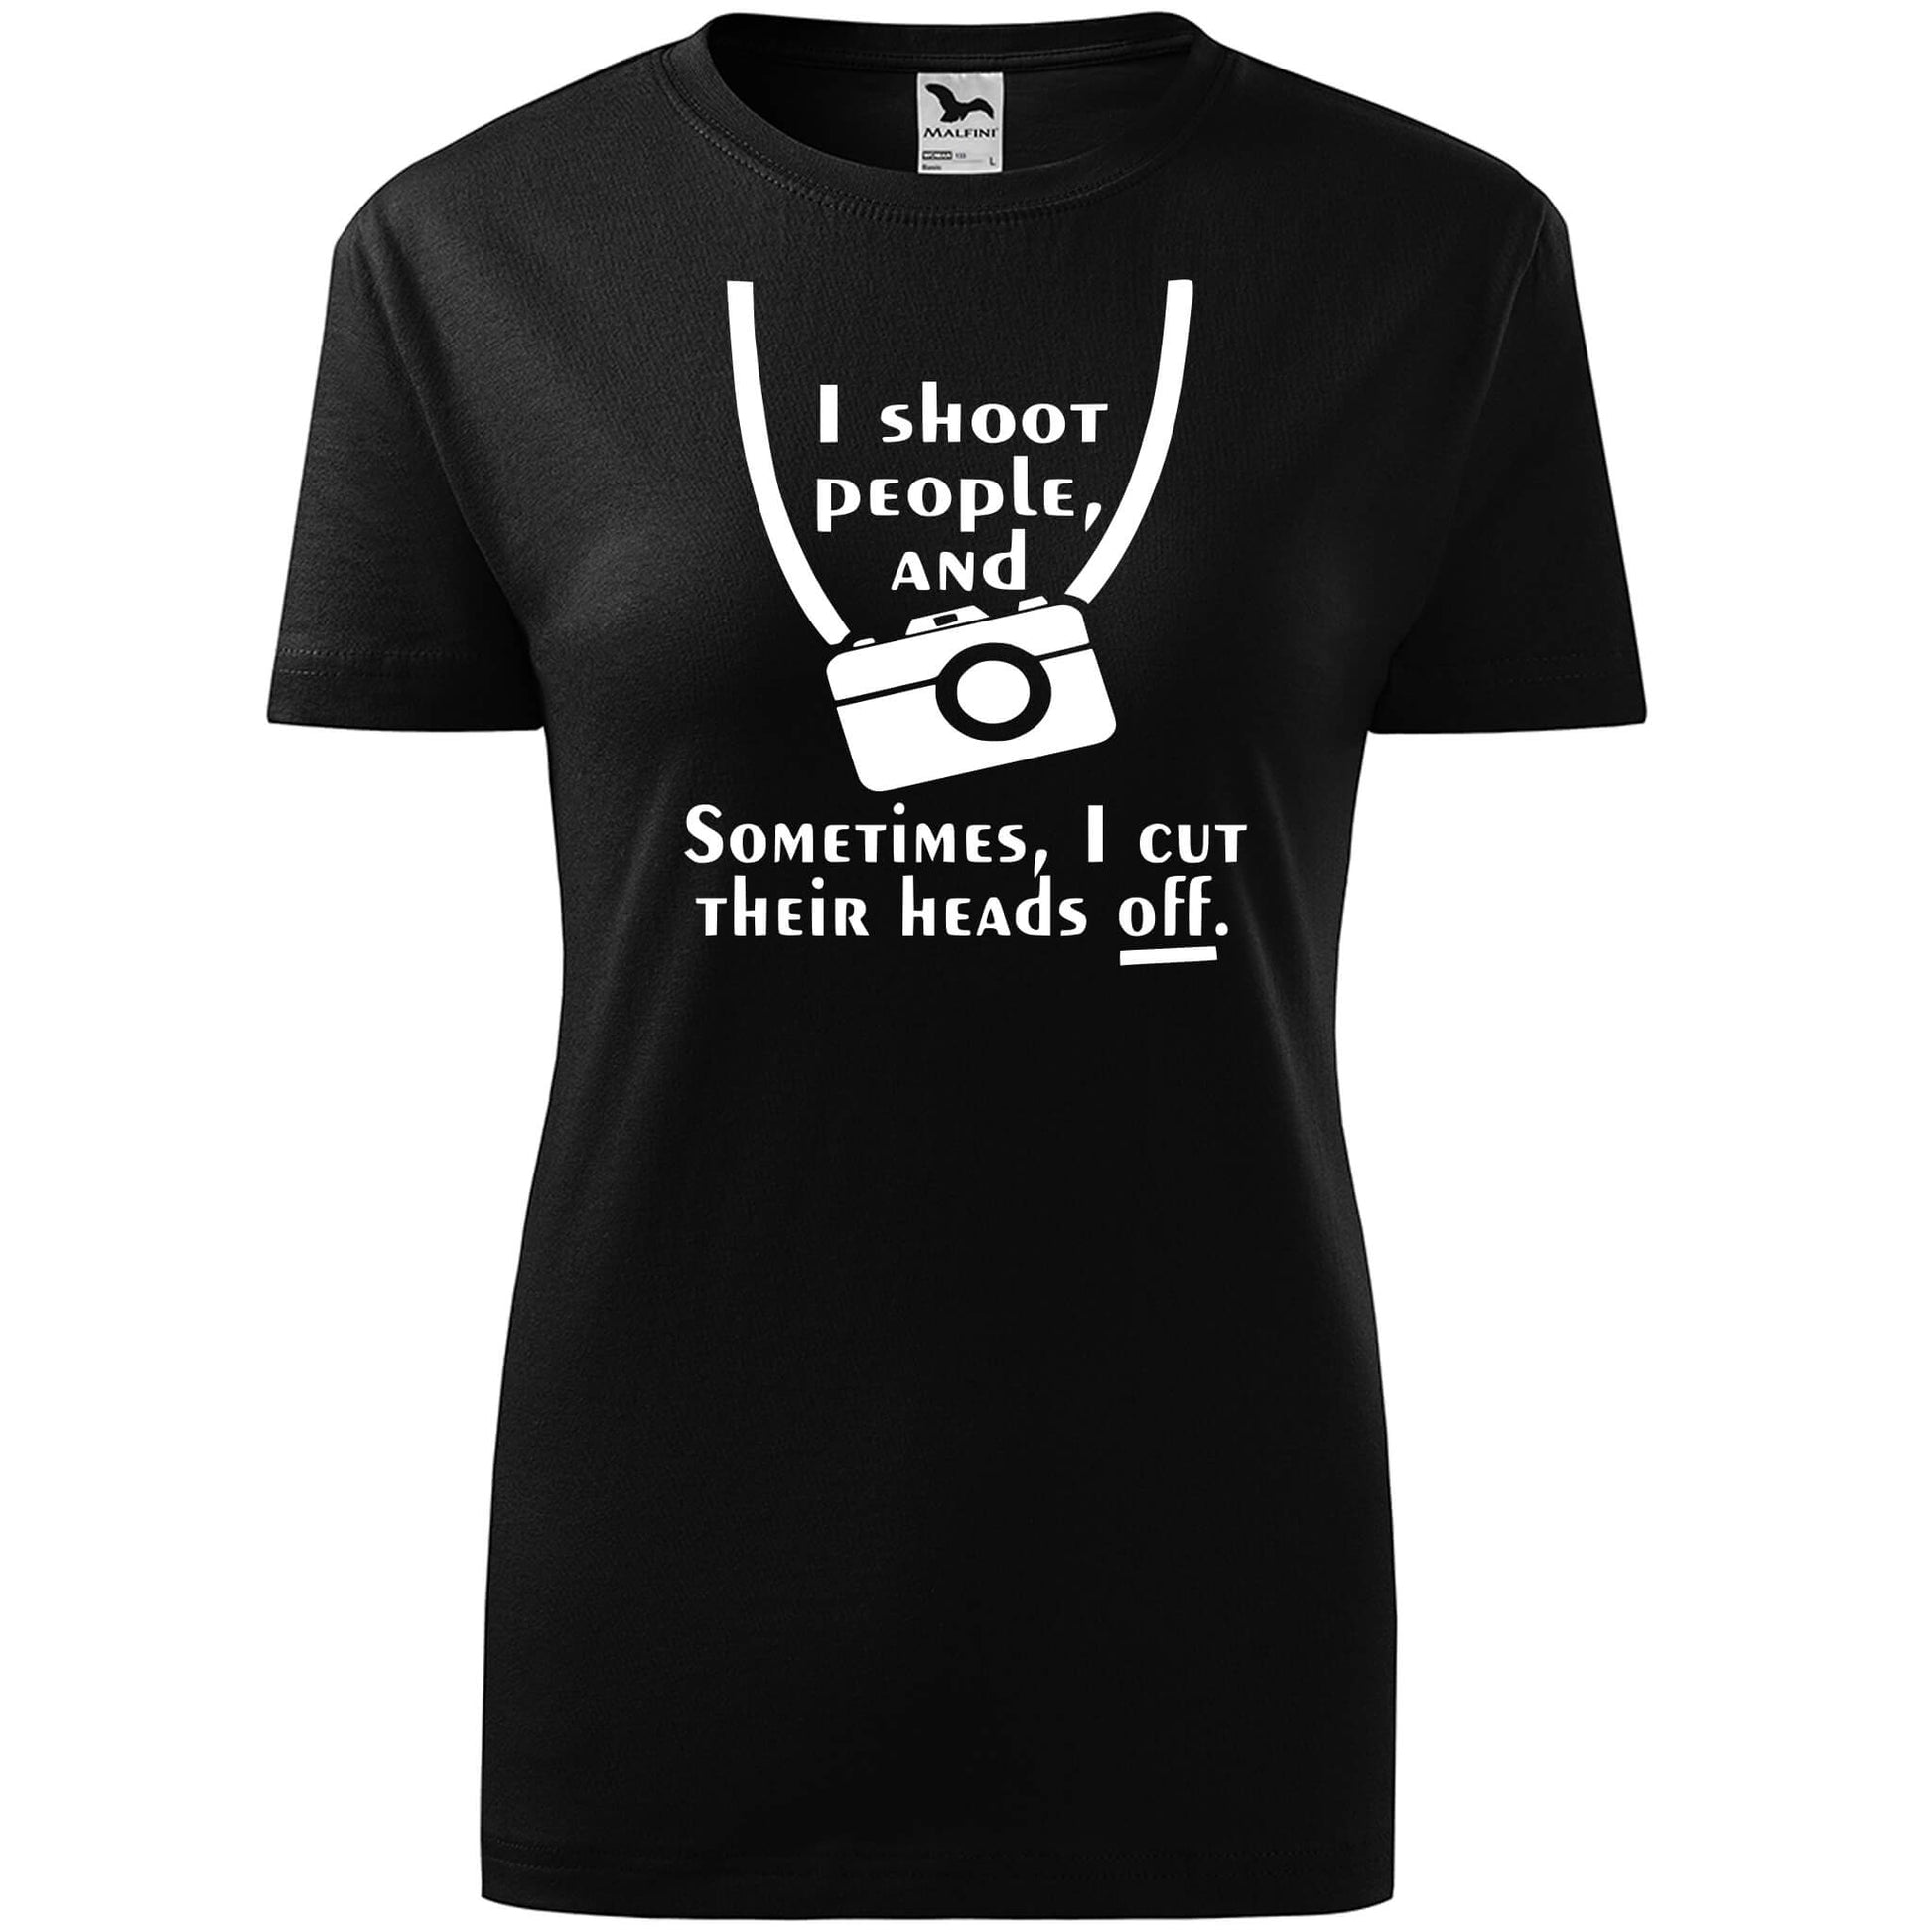 T-shirt - I shoot people and sometimes cut their head off - rvdesignprint